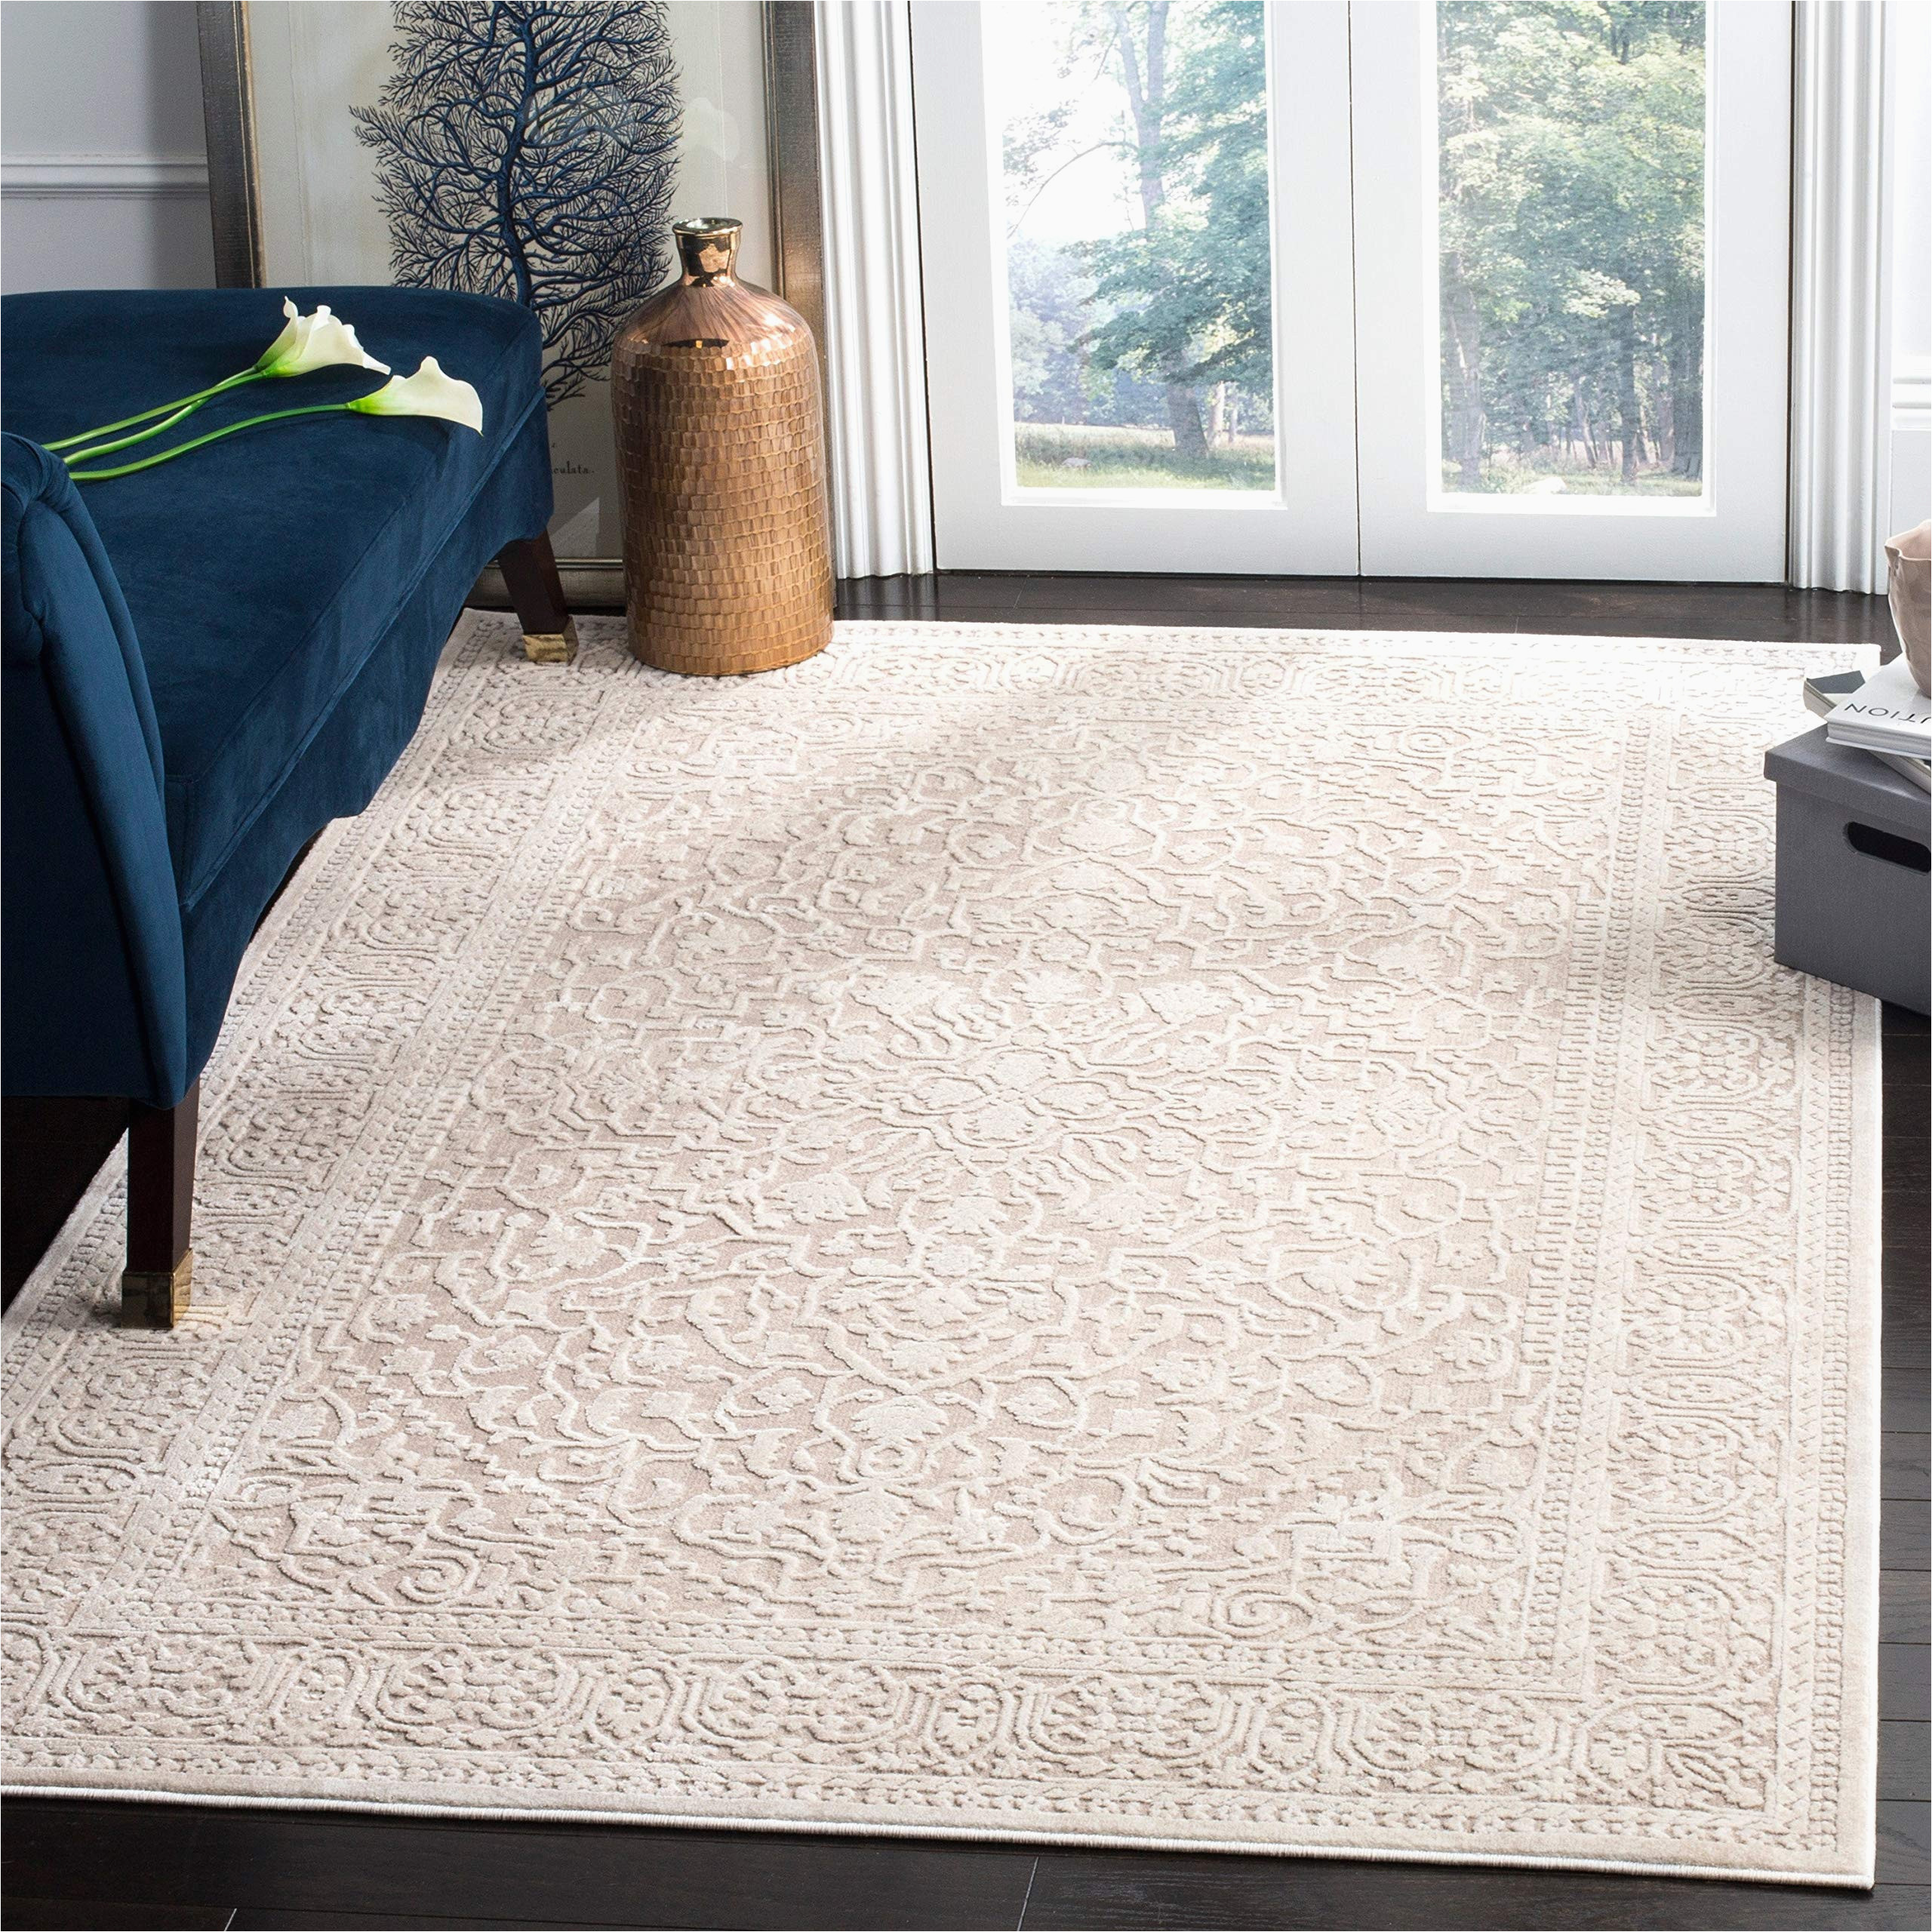 Amazon area Rugs 10 X 14 Safavieh Reflection Collection 10′ X 14′ Beige/cream Rft670a Vintage Distressed area Rug